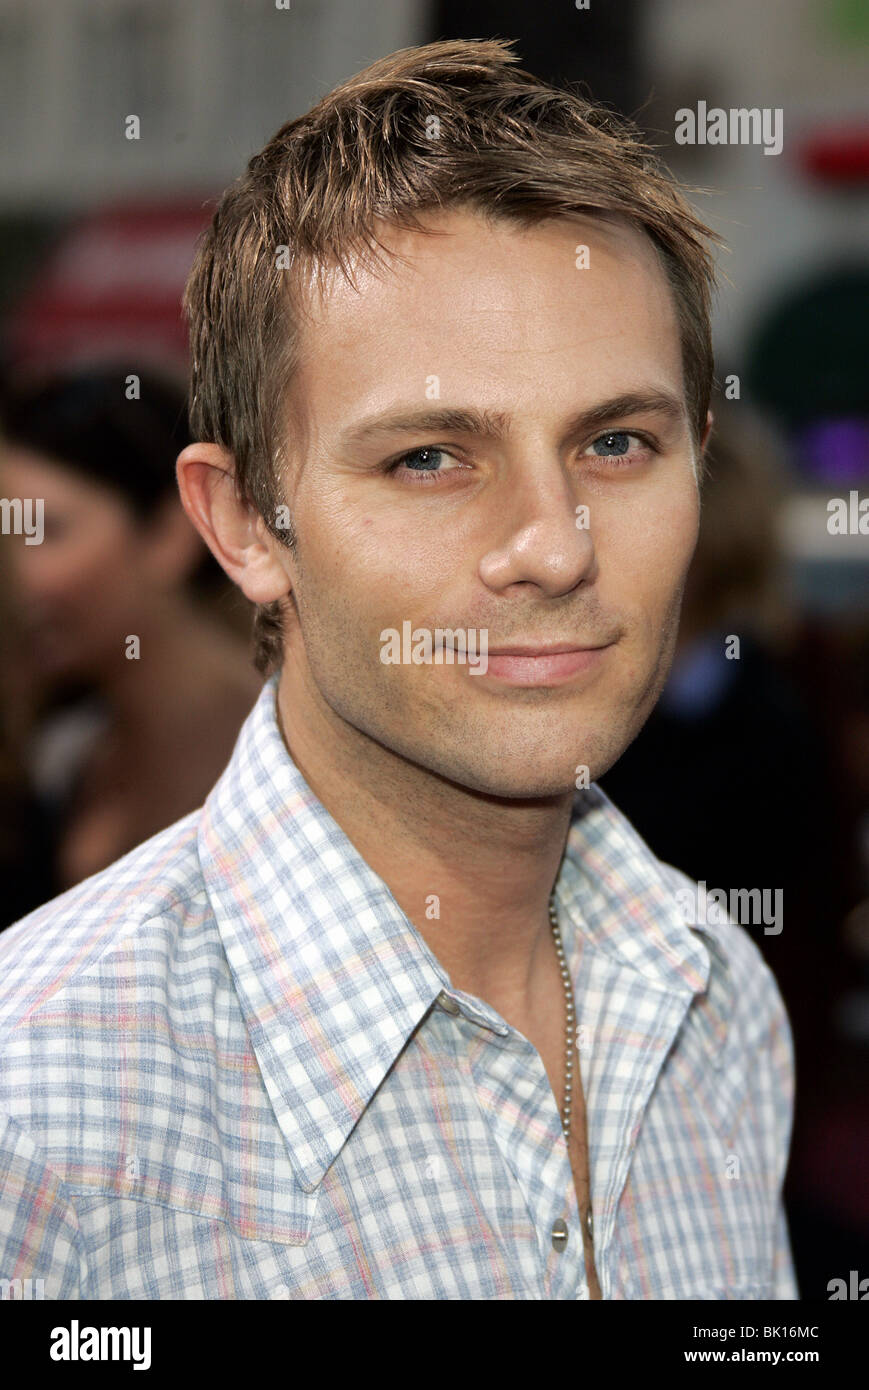 CRAIG YOUNG SILENT HILL WORLD PREMIERE HOLLYWOOD LOS ANGELES USA 20 April 2006 Stock Photo